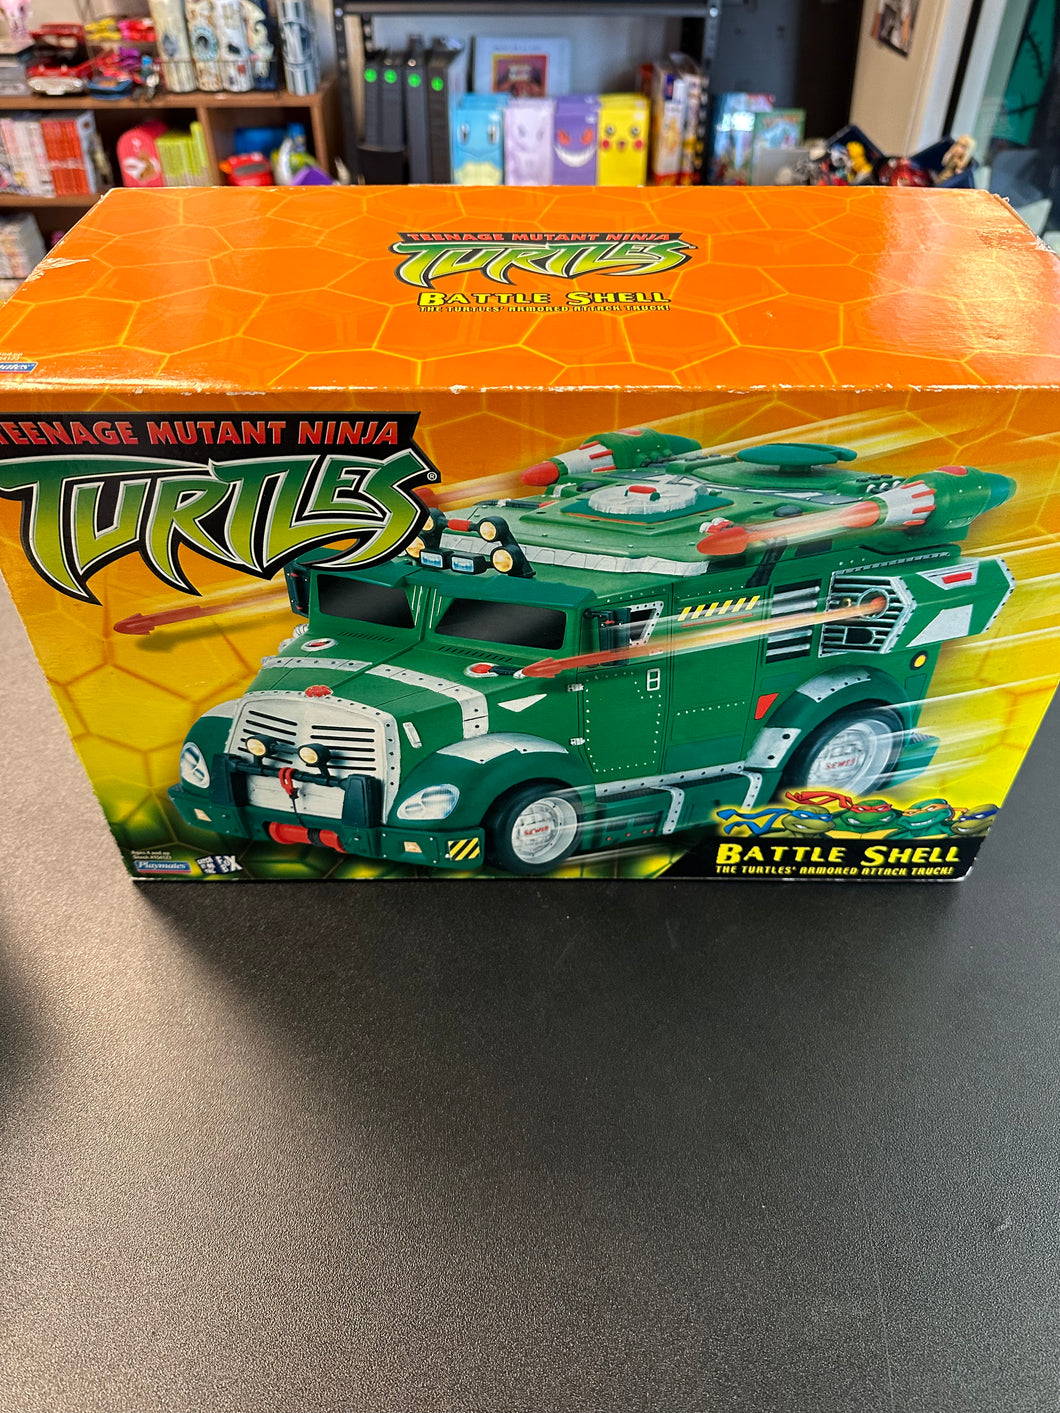 PLAYMATES TMNT BATTLE SHELL ARMORED ATTACK TRUCK 2002